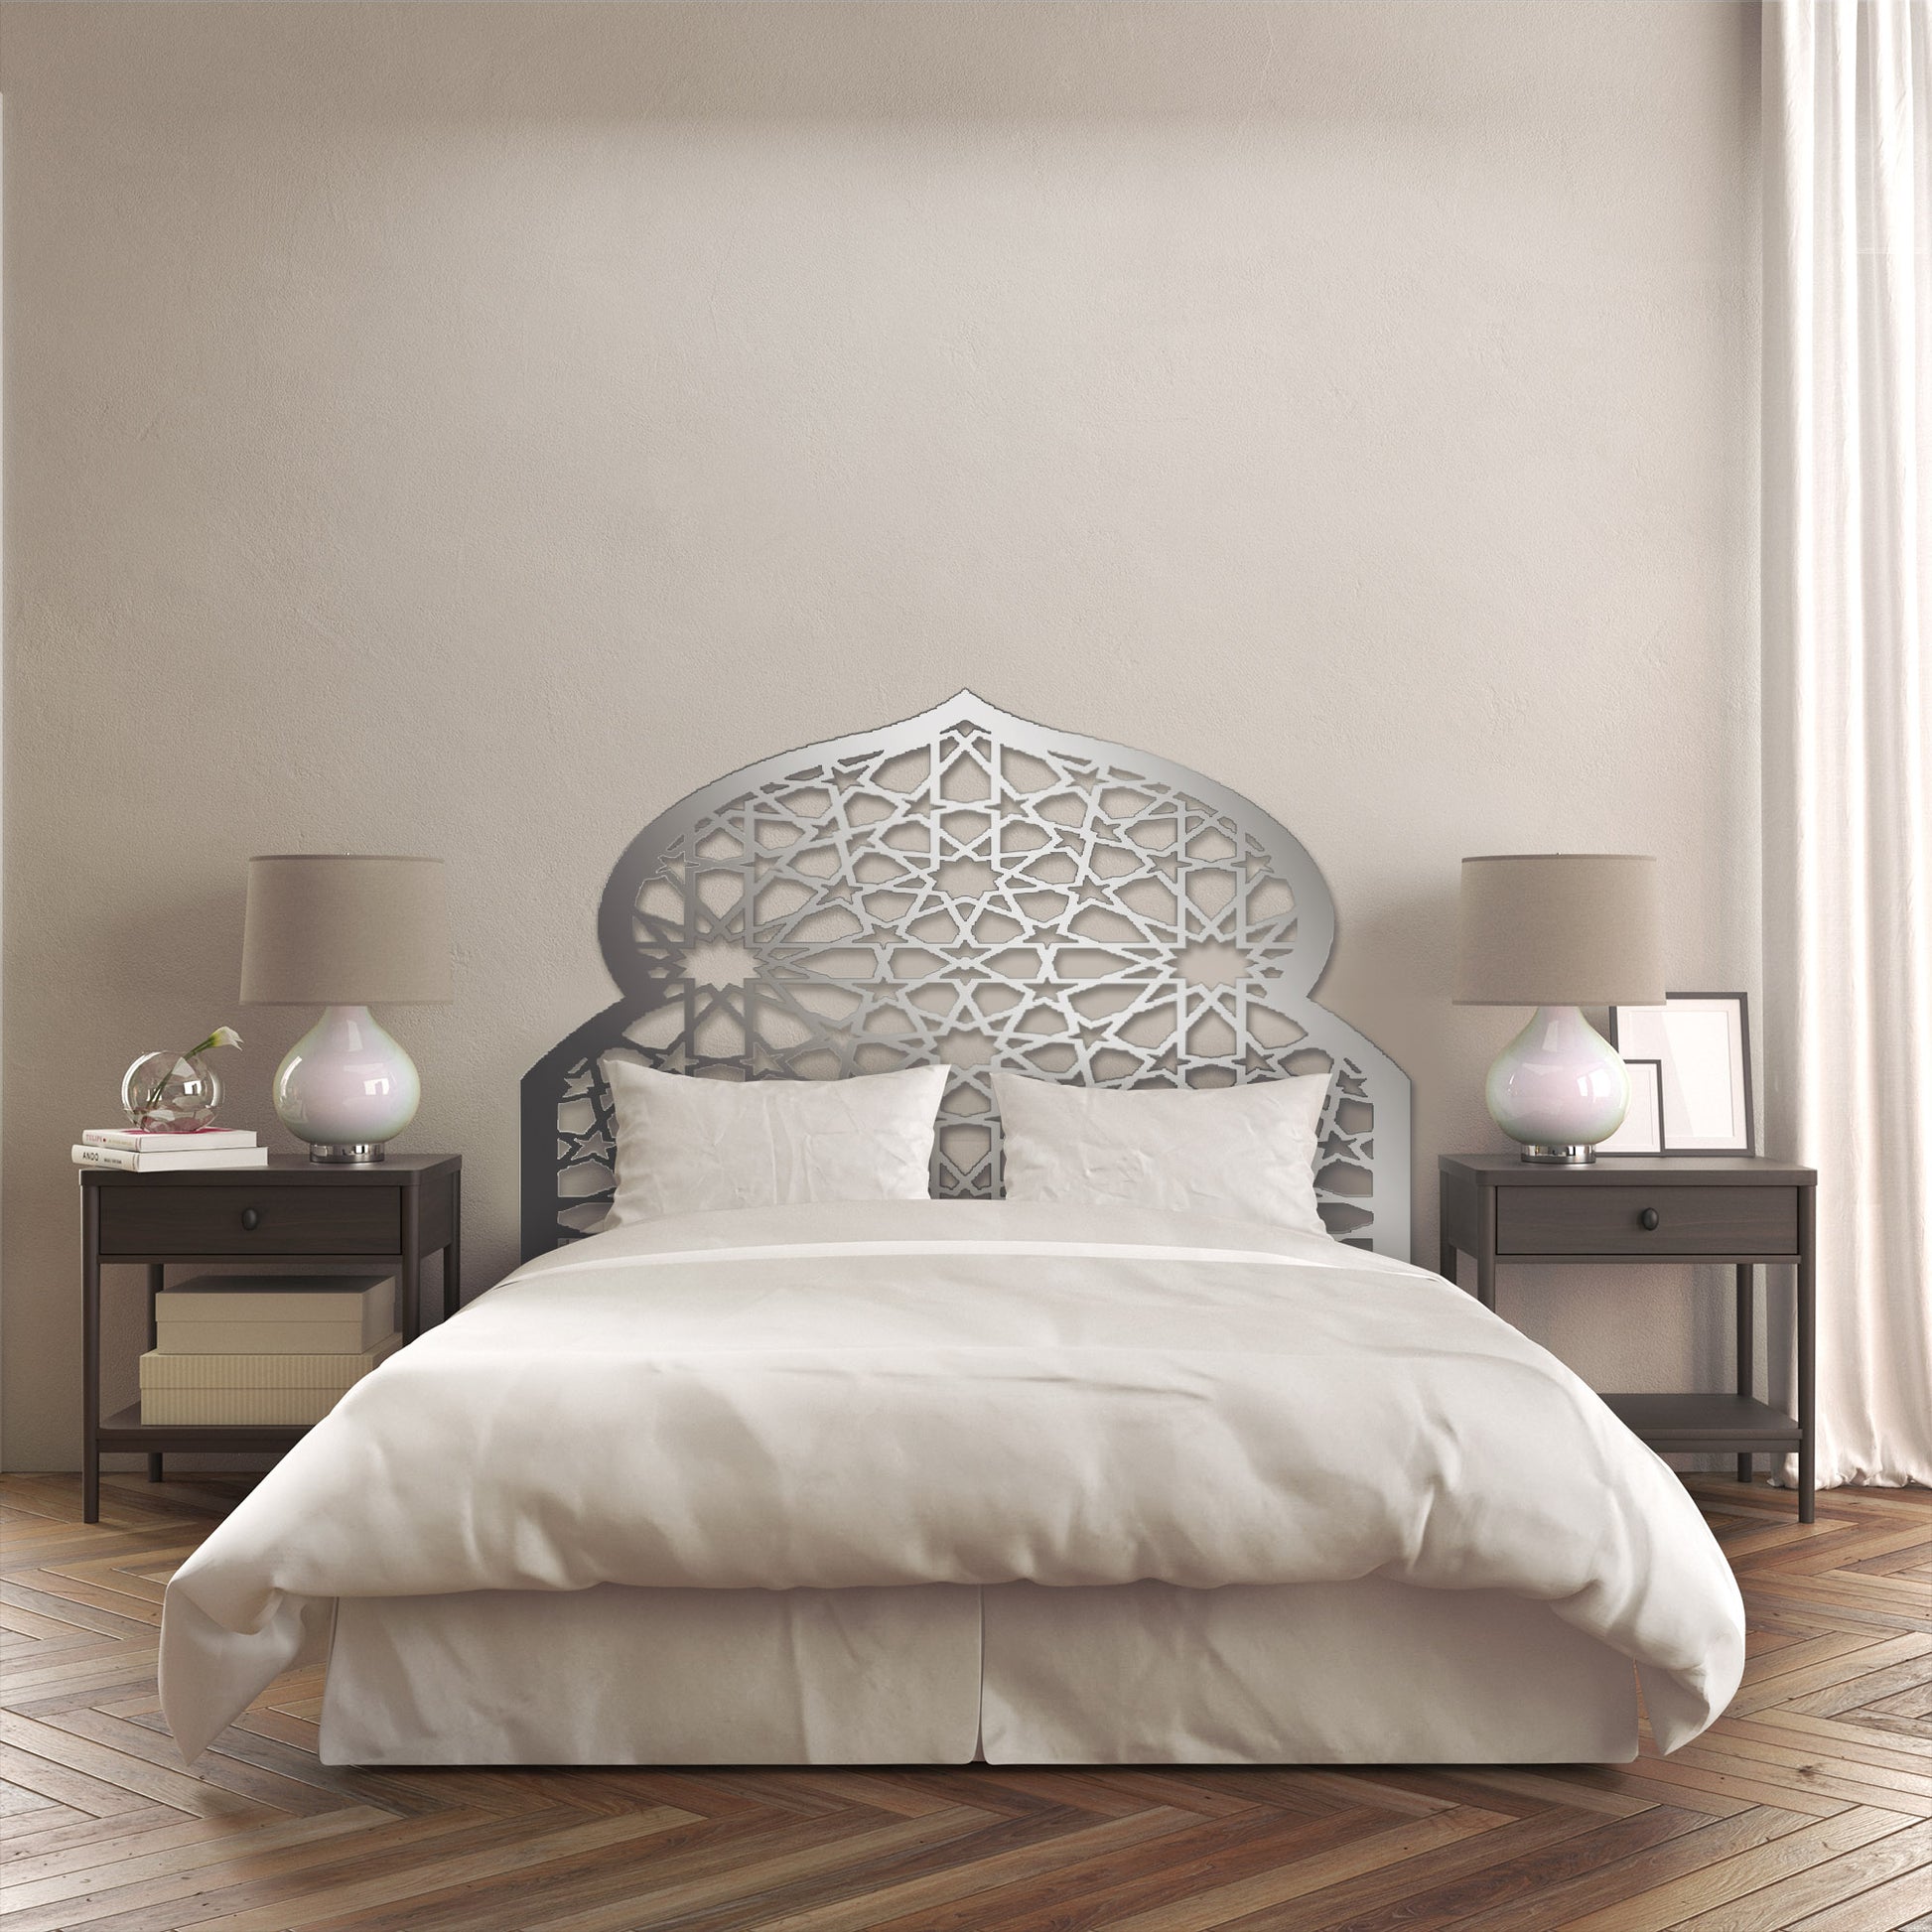 Bedroom decor, Crescent-shaped crown, Birch plywood, Aluminum composite, HDPE, Handmade art, Custom designs, Personalized home decor, Timeless elegance, Islamic-inspired designs, Customization options, Skilled artisans, Unique piece, Sophisticated bedroom, Durable materials, High-quality craftsmanship.